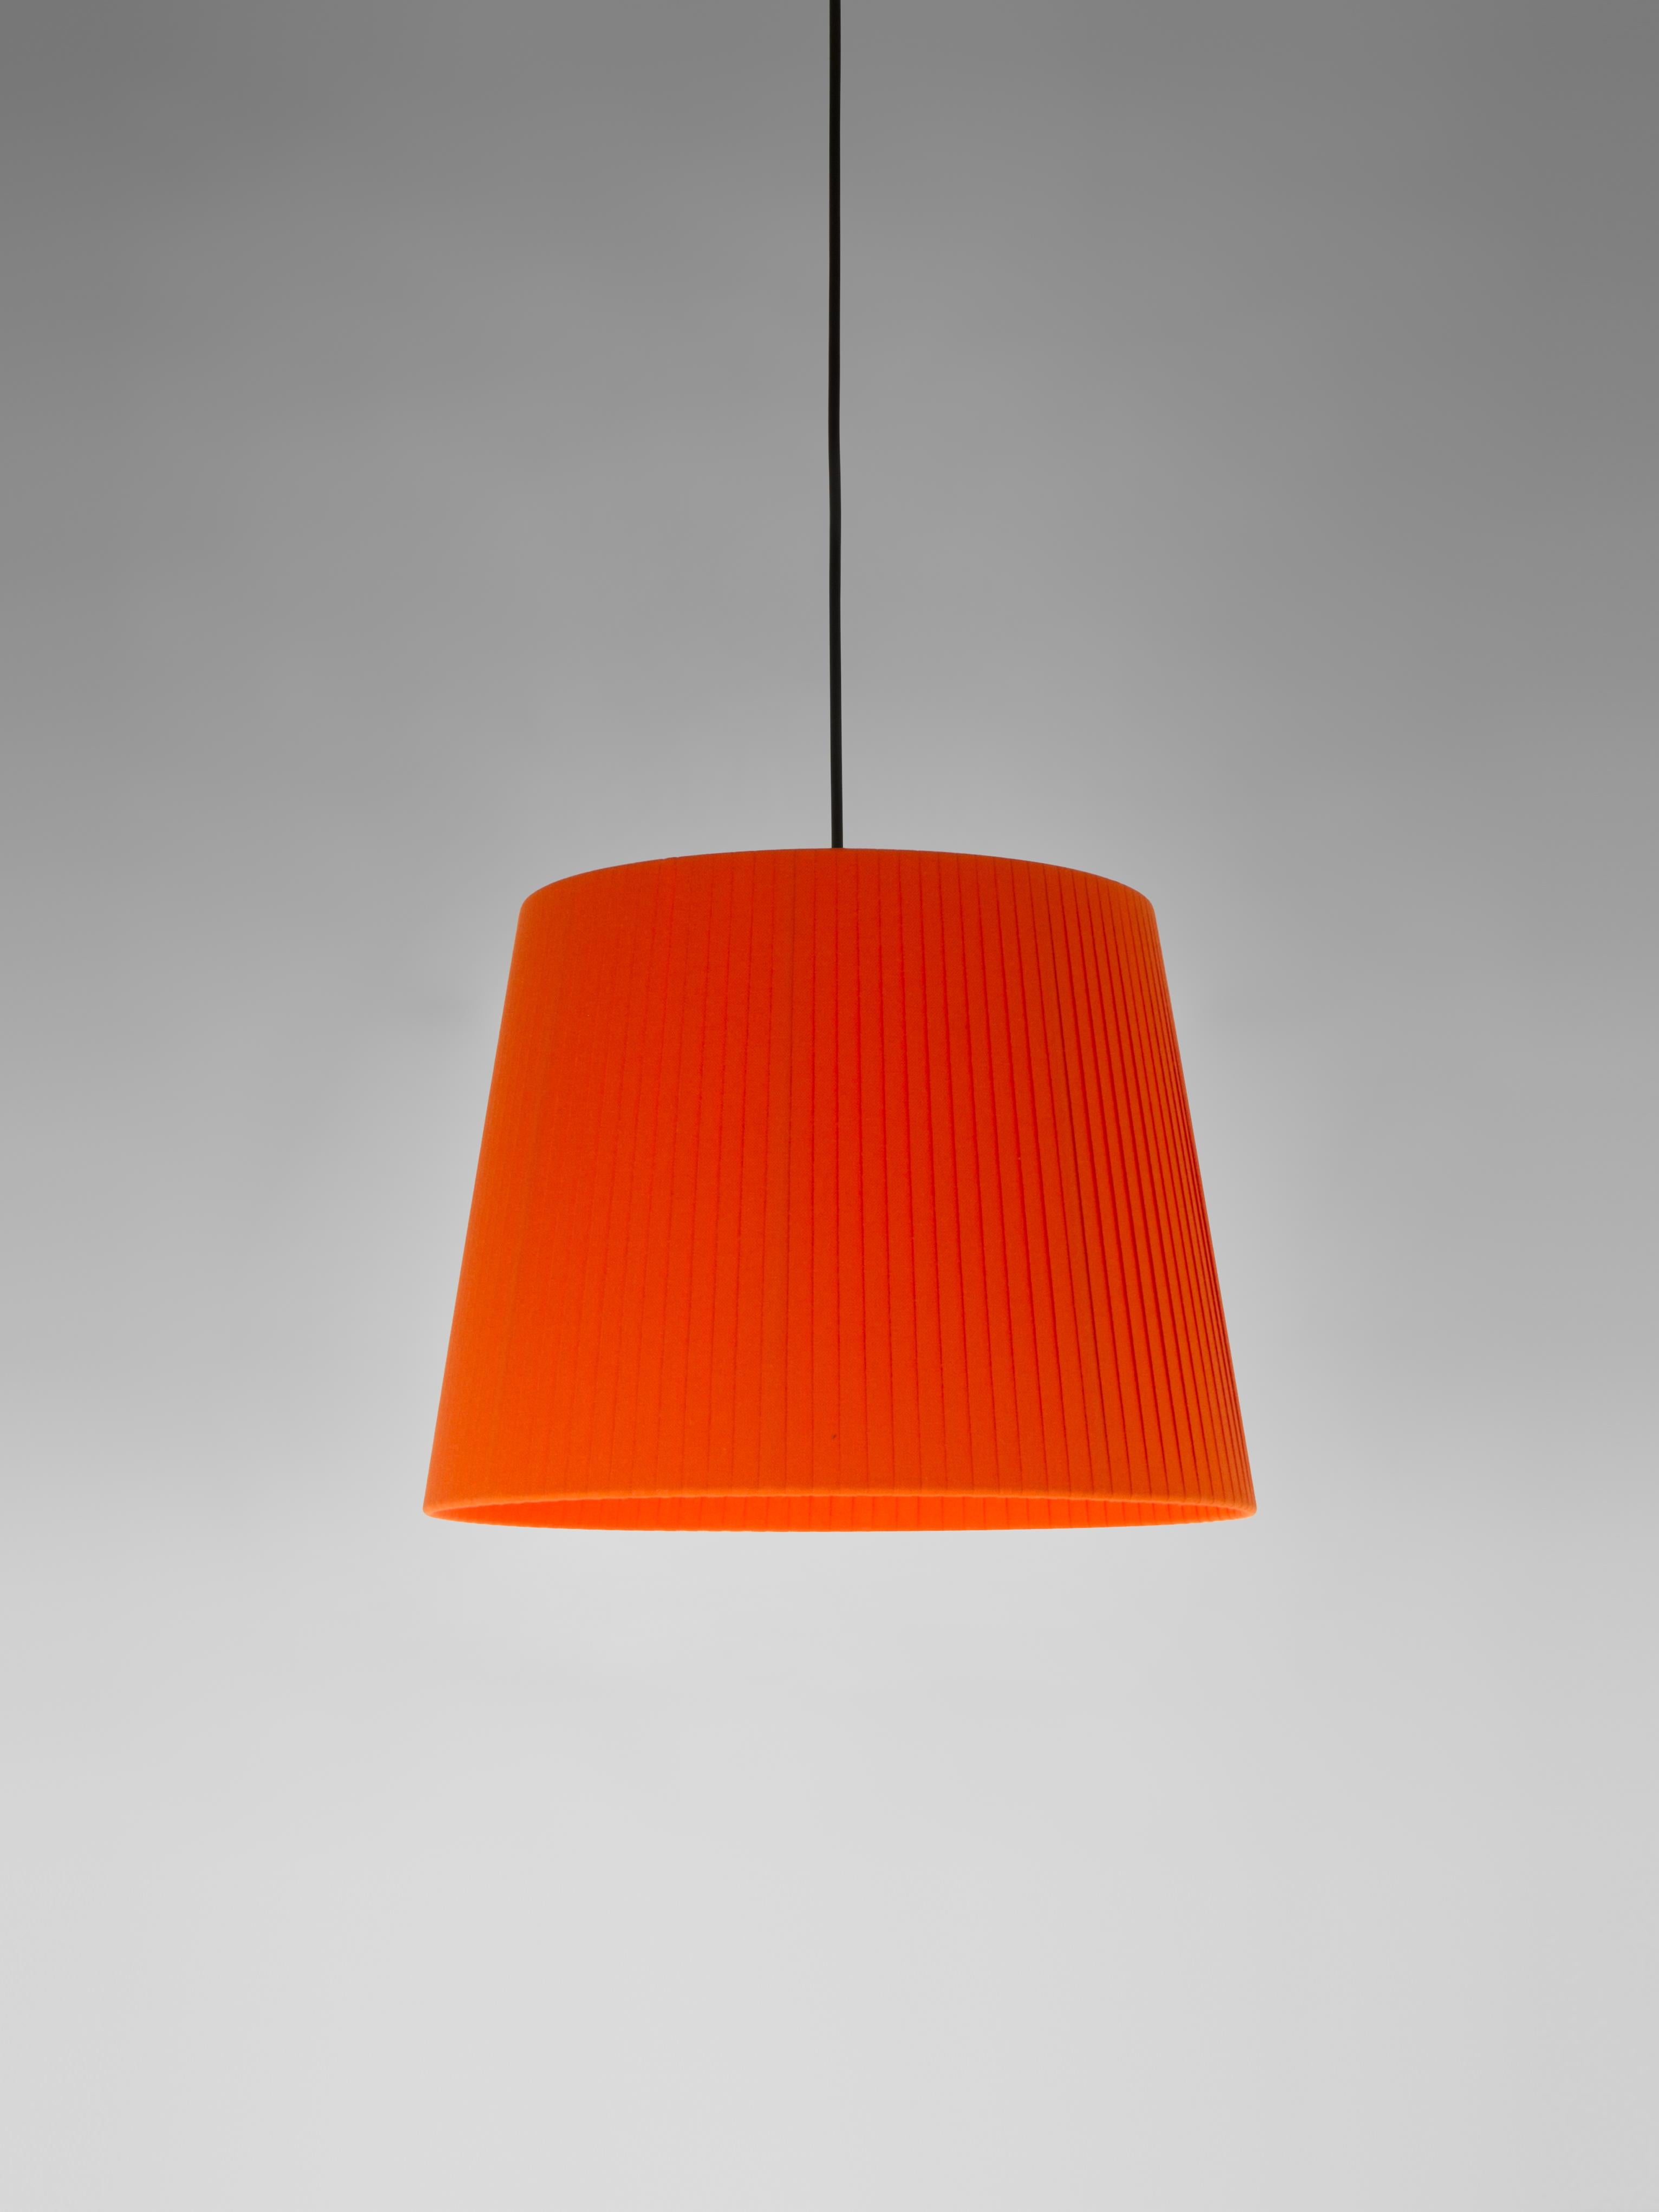 Red sísísí cónicas GT3 pendant lamp by Santa & Cole
Dimensions: D 36 x H 27 cm
Materials: Metal, ribbon.
Available in other colors.

The conical shape group has multiple finishes and sizes. It consists of four sizes: PT1, MT1, GT1 and GT3, and